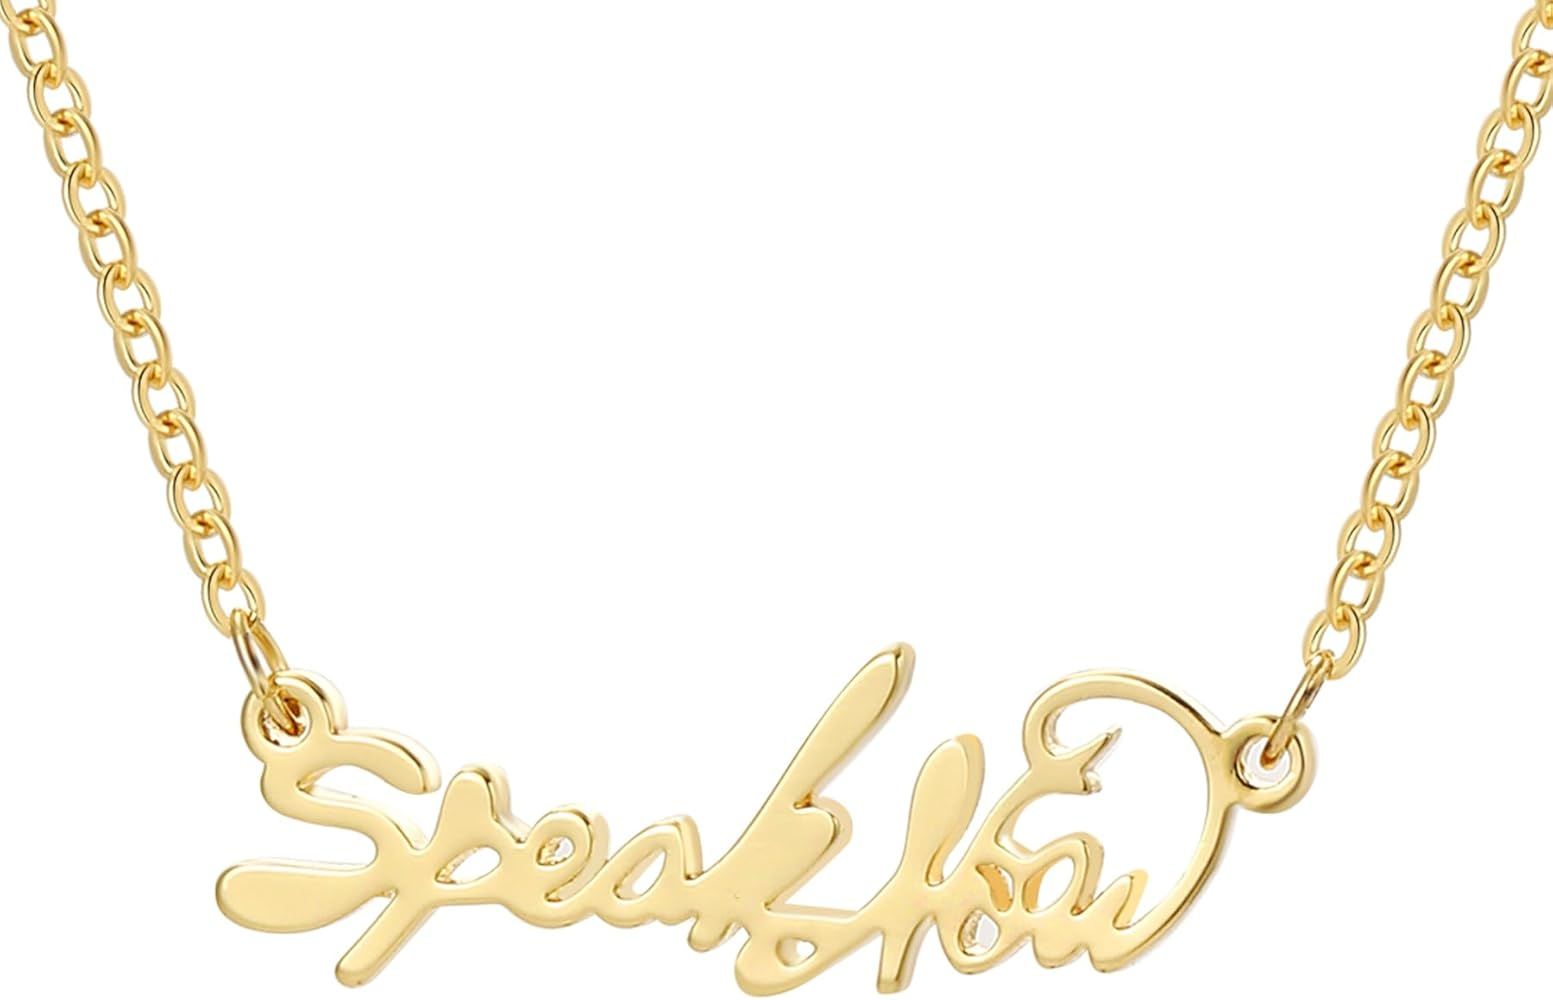 BUREI TS Album Song Title Name Necklace,TS Inspired Necklace for Swiftie Folklore Lover 1989 Speak Now Reputation Necklace for Eras Tour Outfit | Amazon (US)